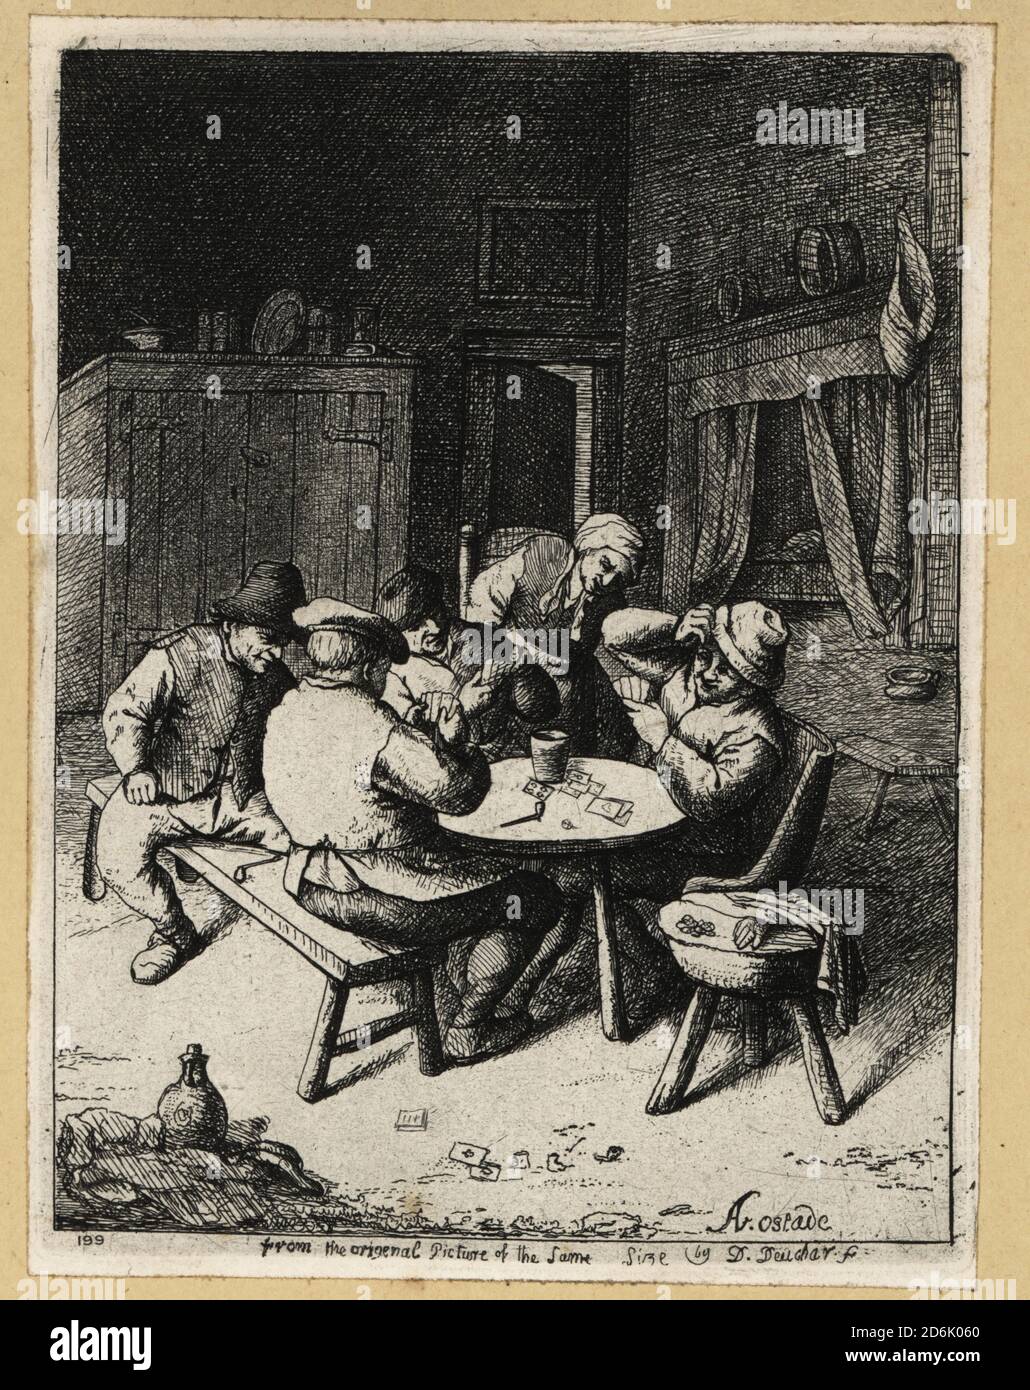 Dutch peasants playing a game of cards at a table in an inn. Cups, cards and tobacco pipes on the table, with large wardrobe and cupboardbed in rear. Game of Cards. Copperplate engraving by David Deuchar after an original by Adriaen van Ostade from A Collection of Etchings after the most Eminent Masters of the Dutch and Flemish Schools, Edinburgh, 1803. Stock Photo